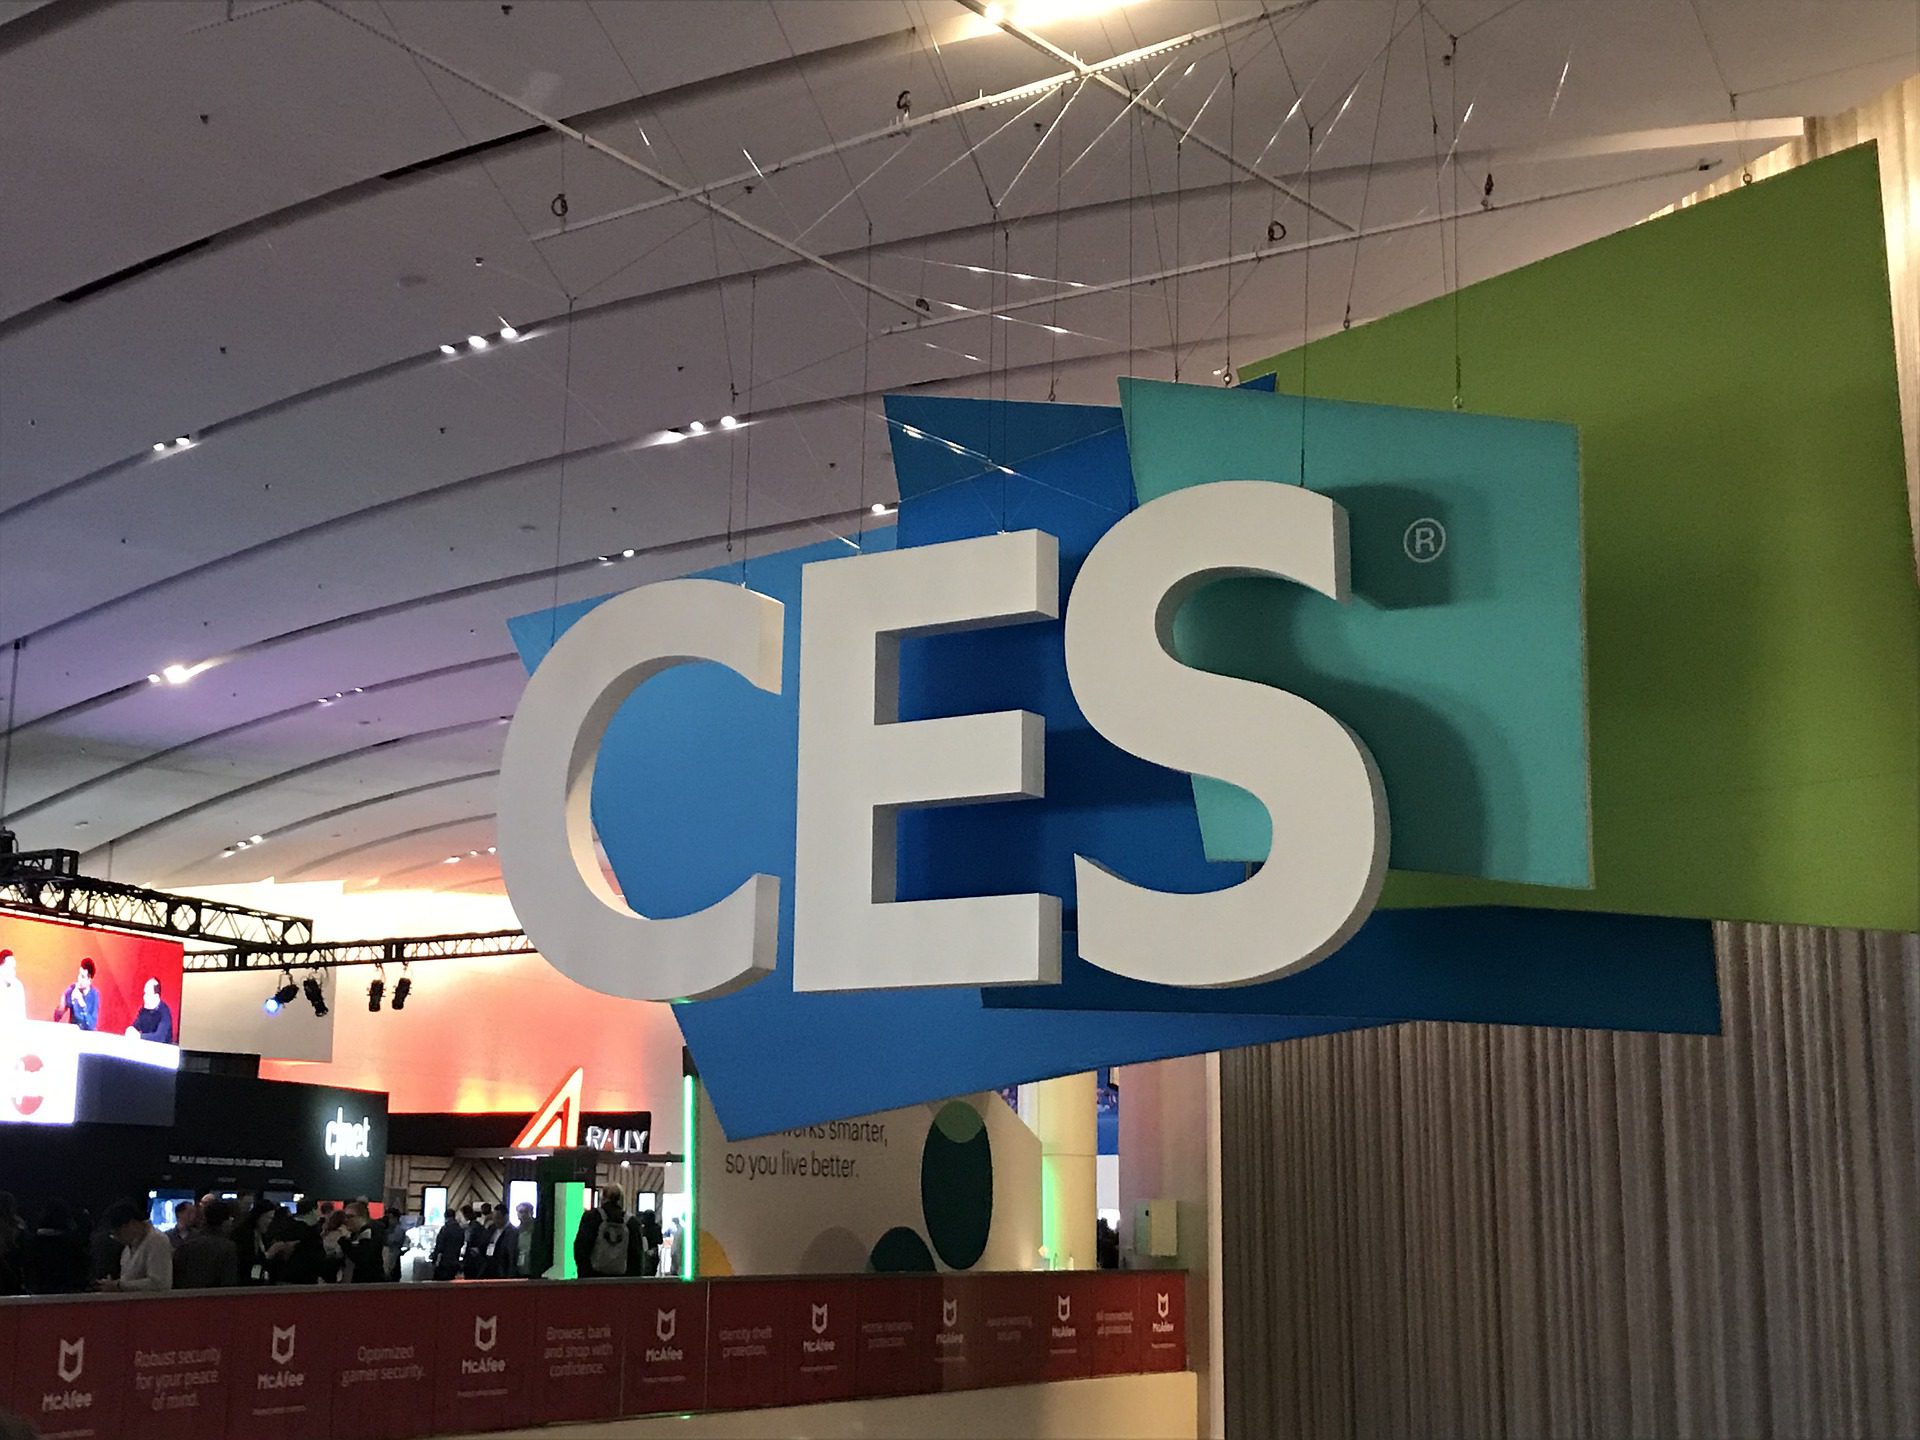 What Everyone Expects at CES 2021